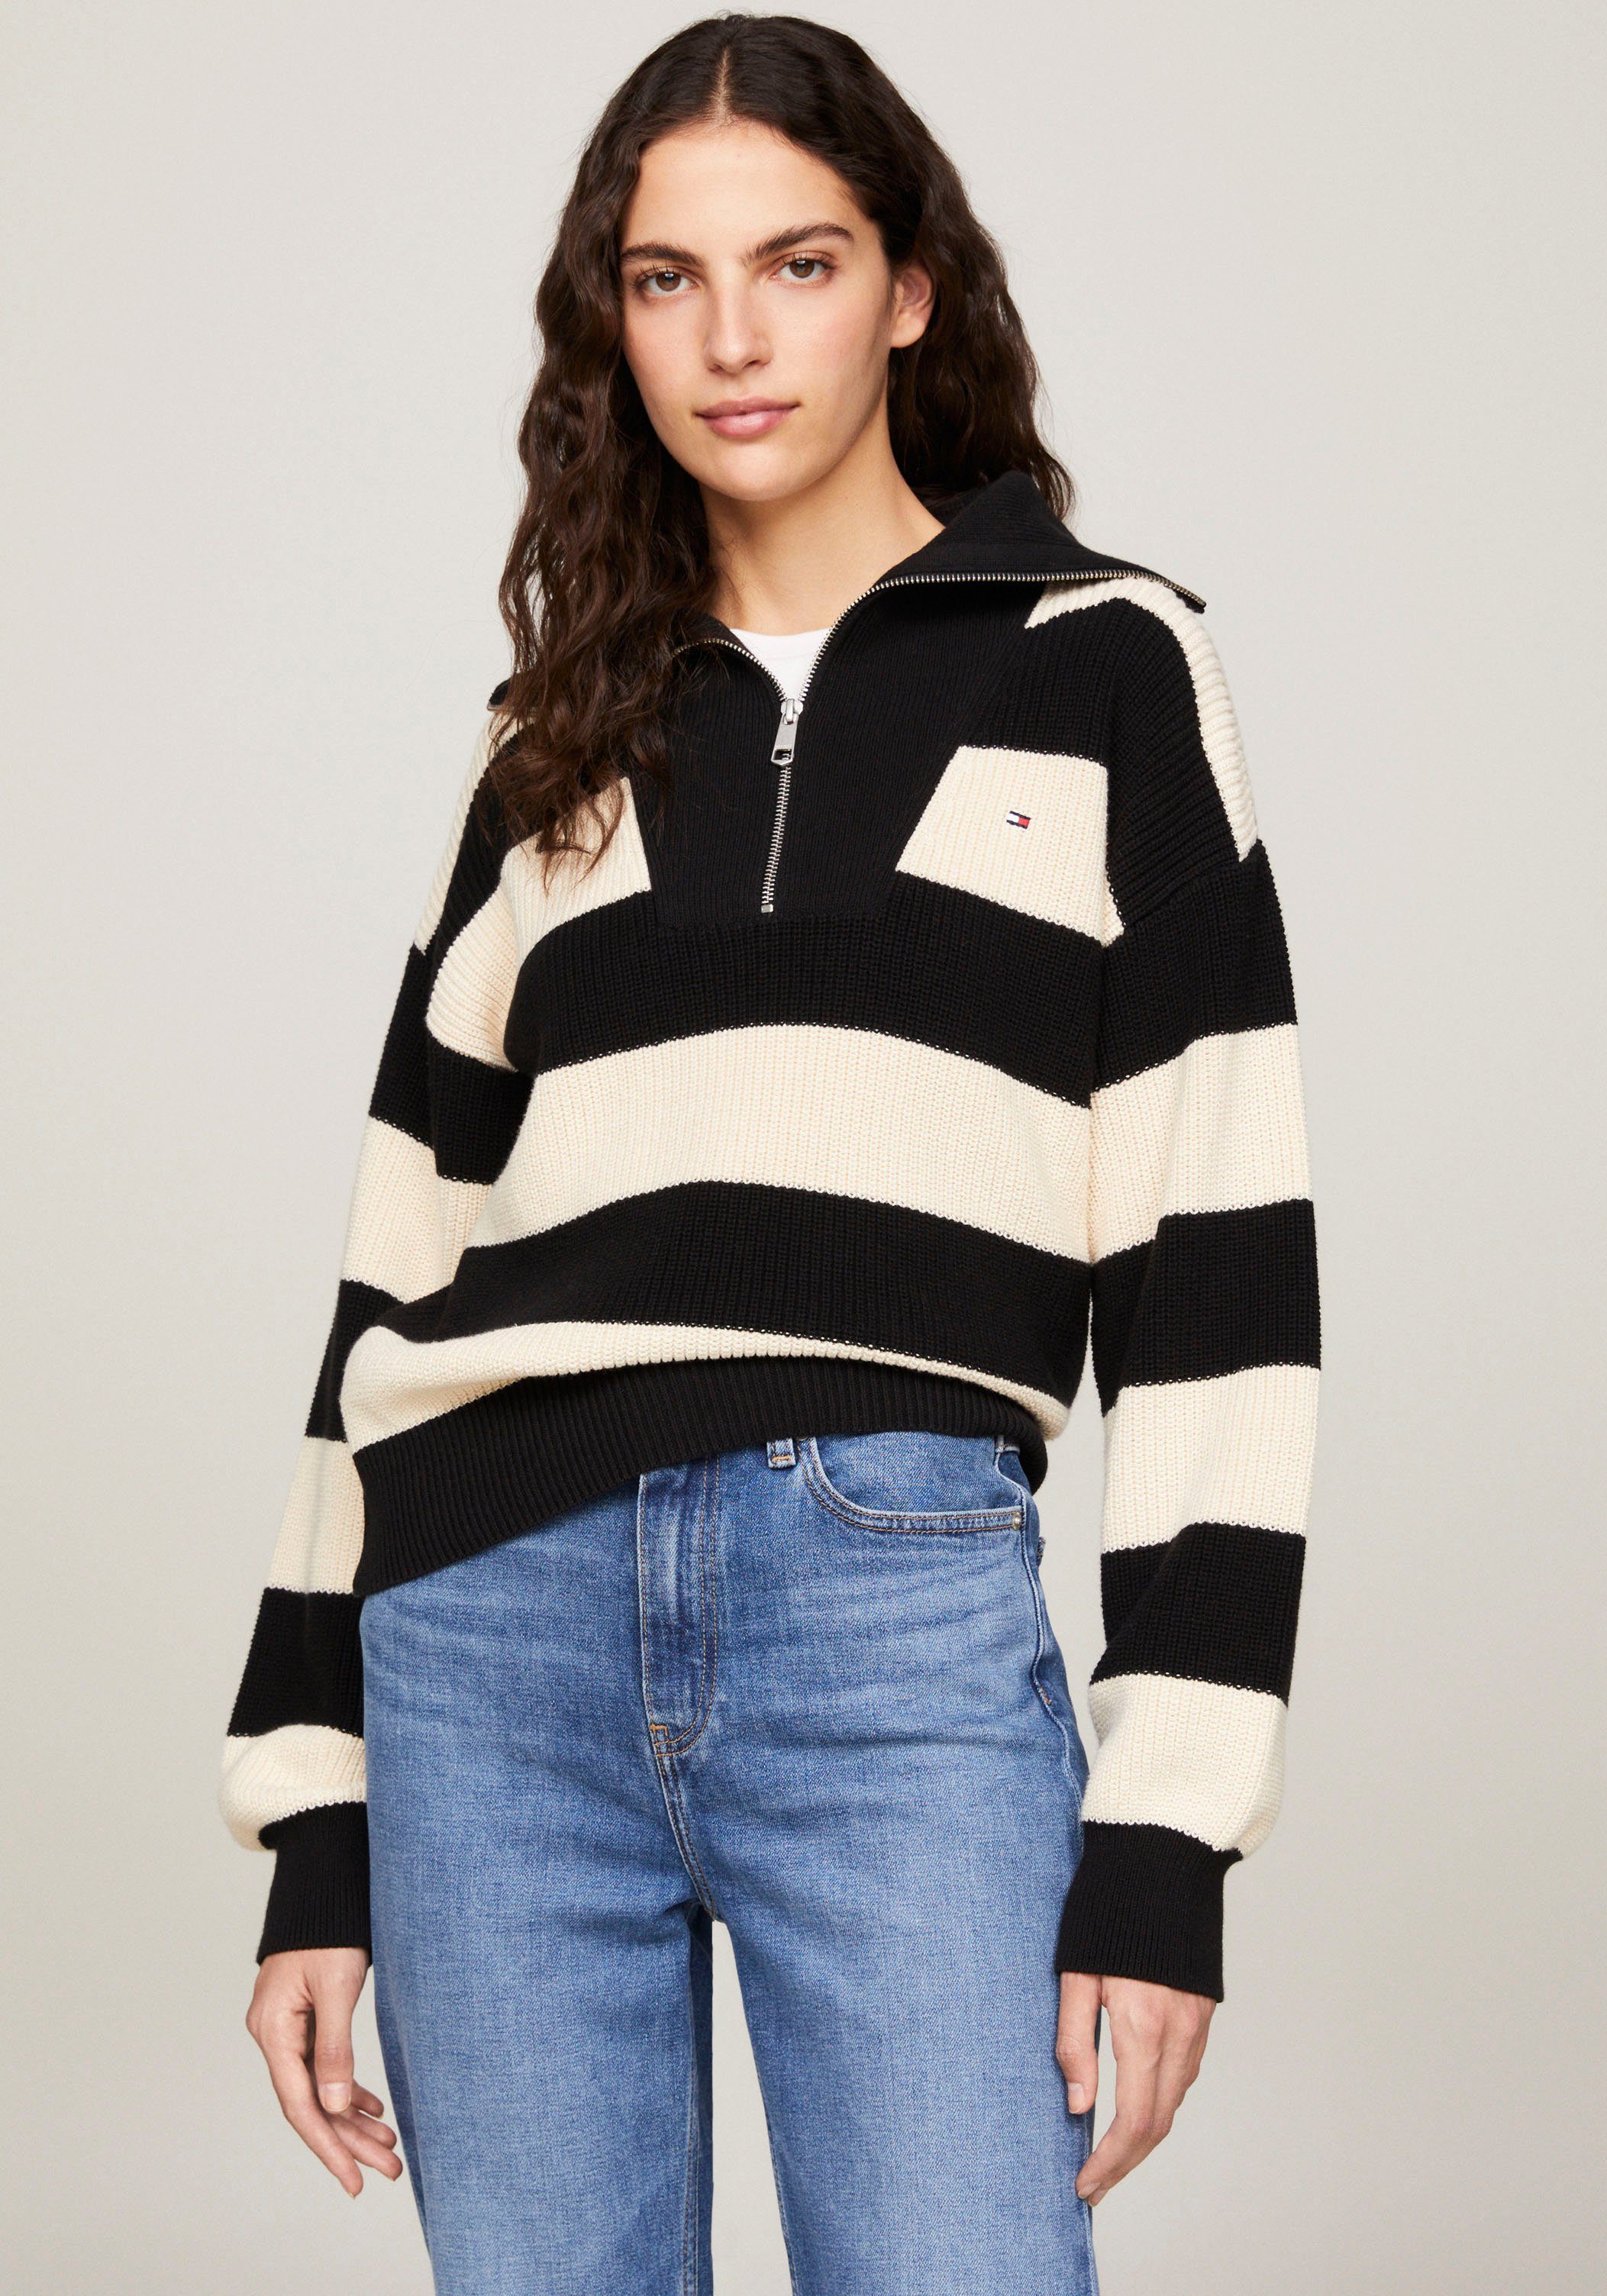 Tommy Hilfiger Strickpullover CO CARDI STITCH 1/2 ZIP SWT Black/_Calico_Rugby_Stp